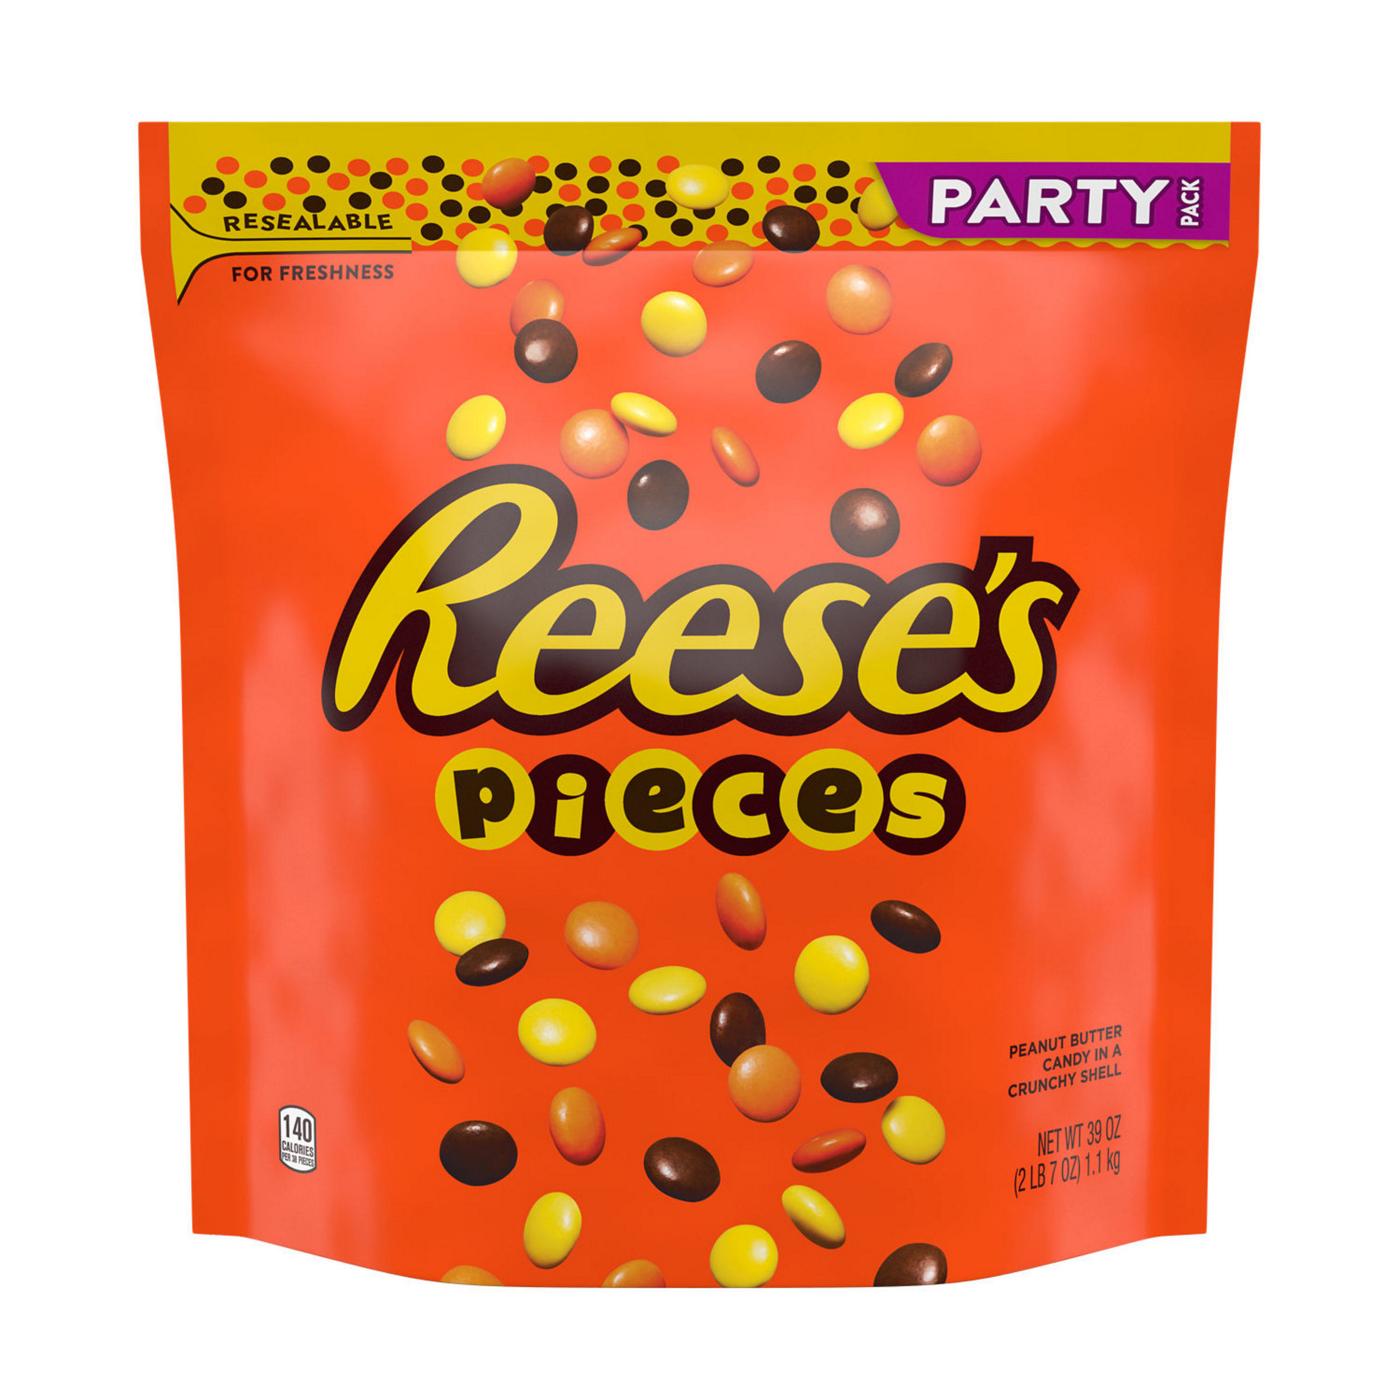 Reese's Pieces Peanut Butter Candy - Party Pack; image 1 of 4